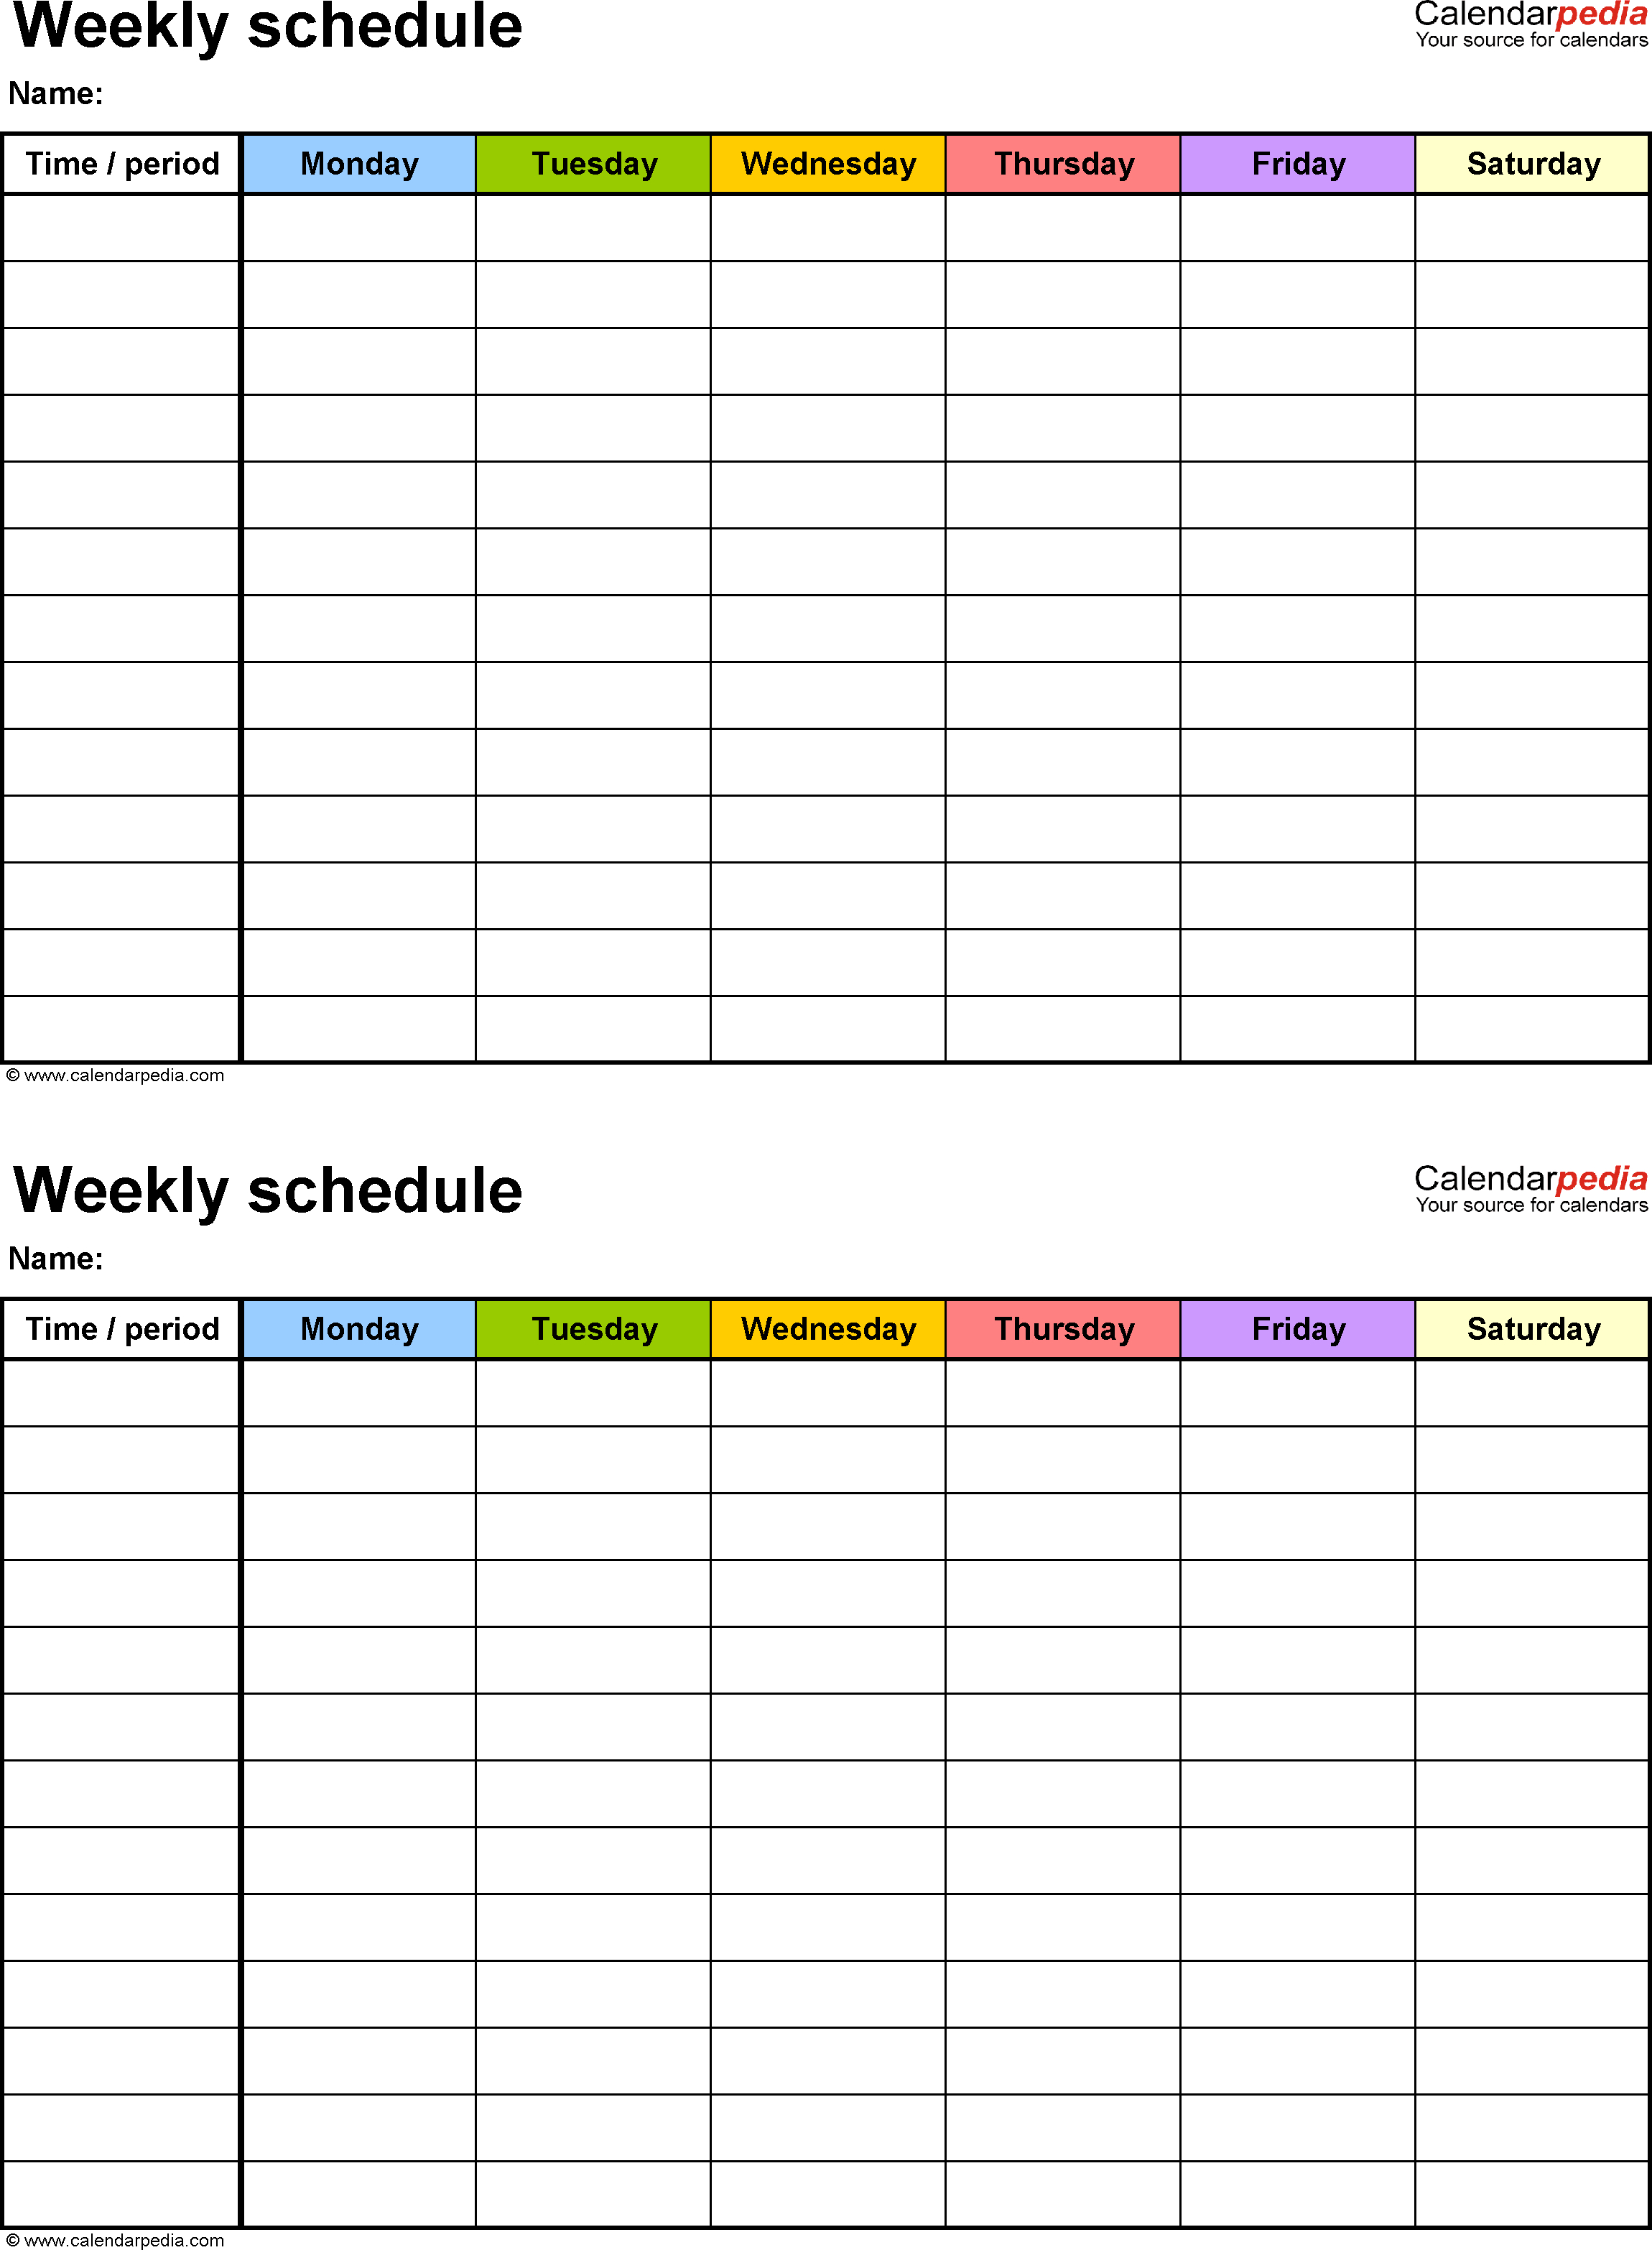 Free Weekly Schedule Templates For Pdf  18 Templates intended for Calendarpedia Weekly Schedule